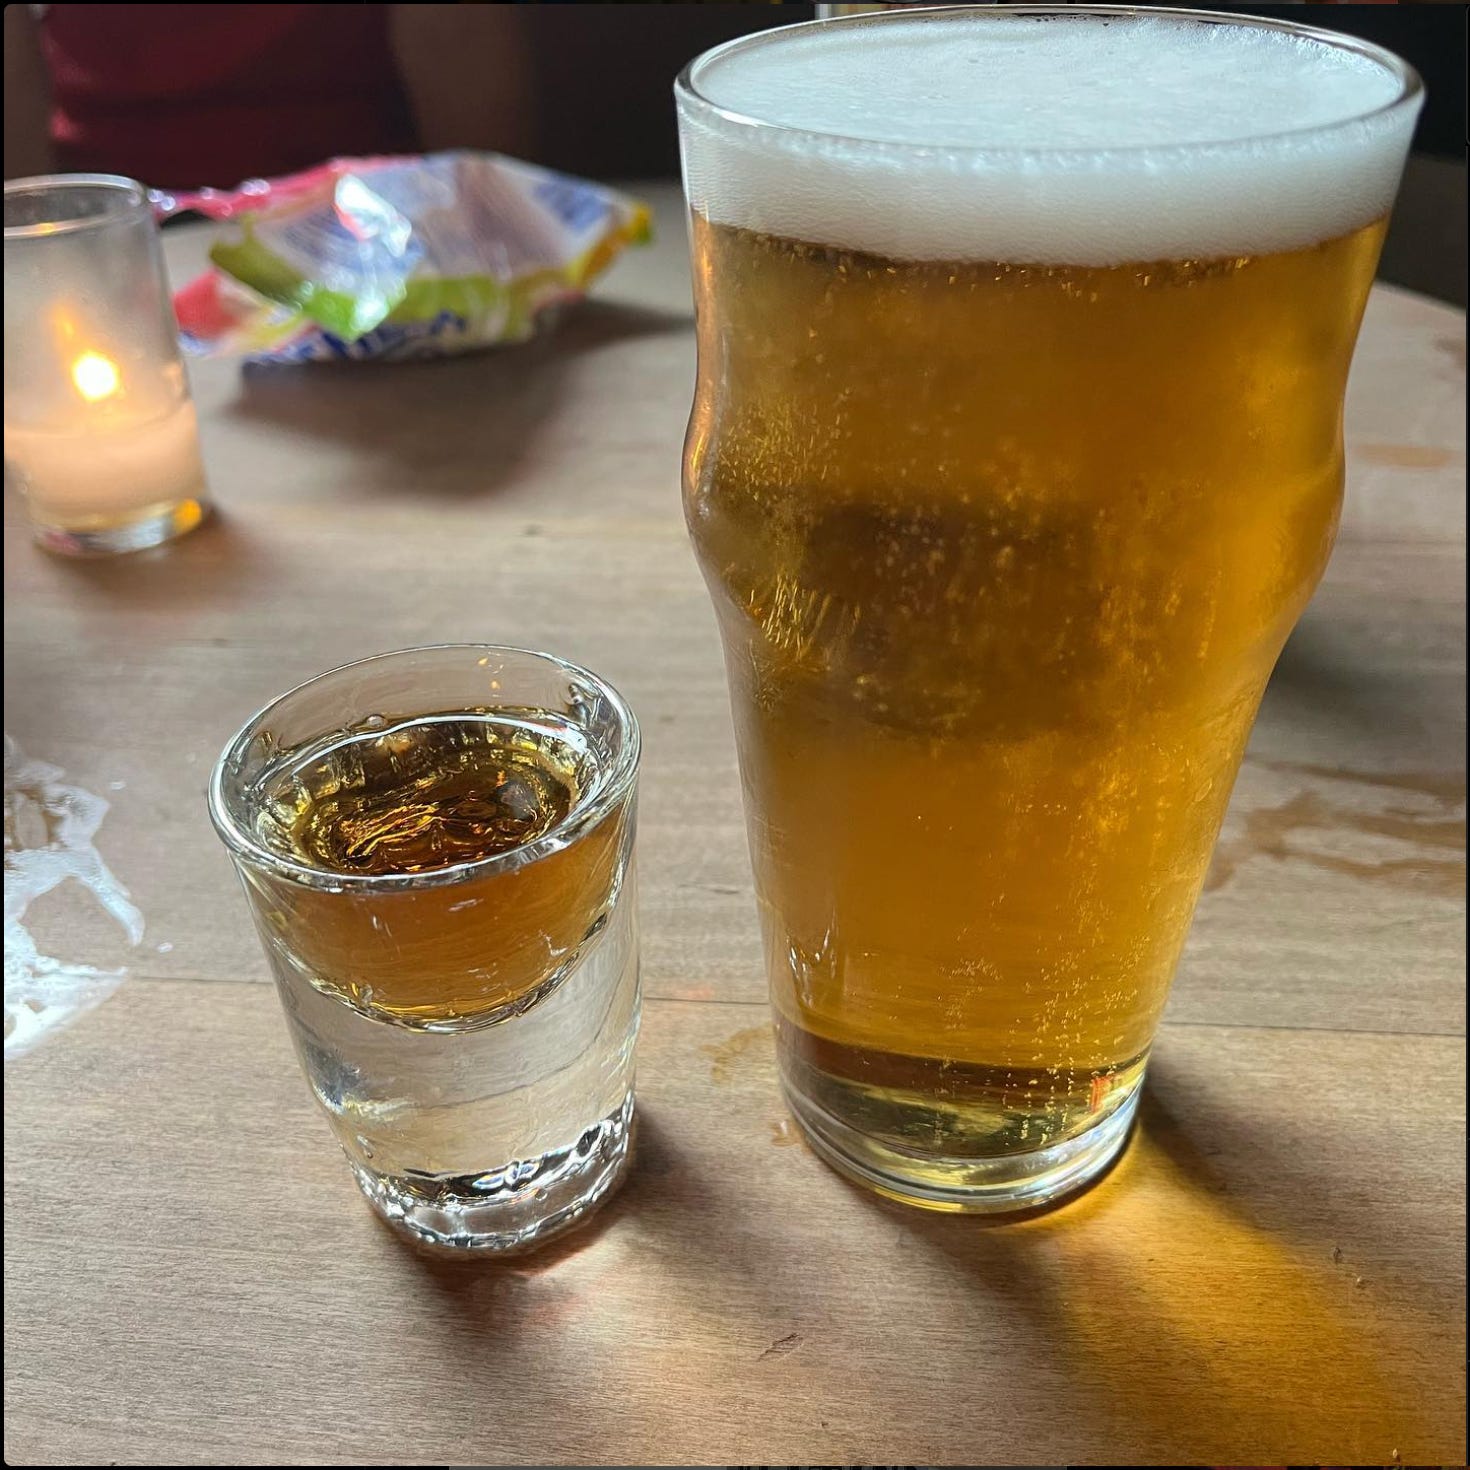 A shot and draft beer glass.